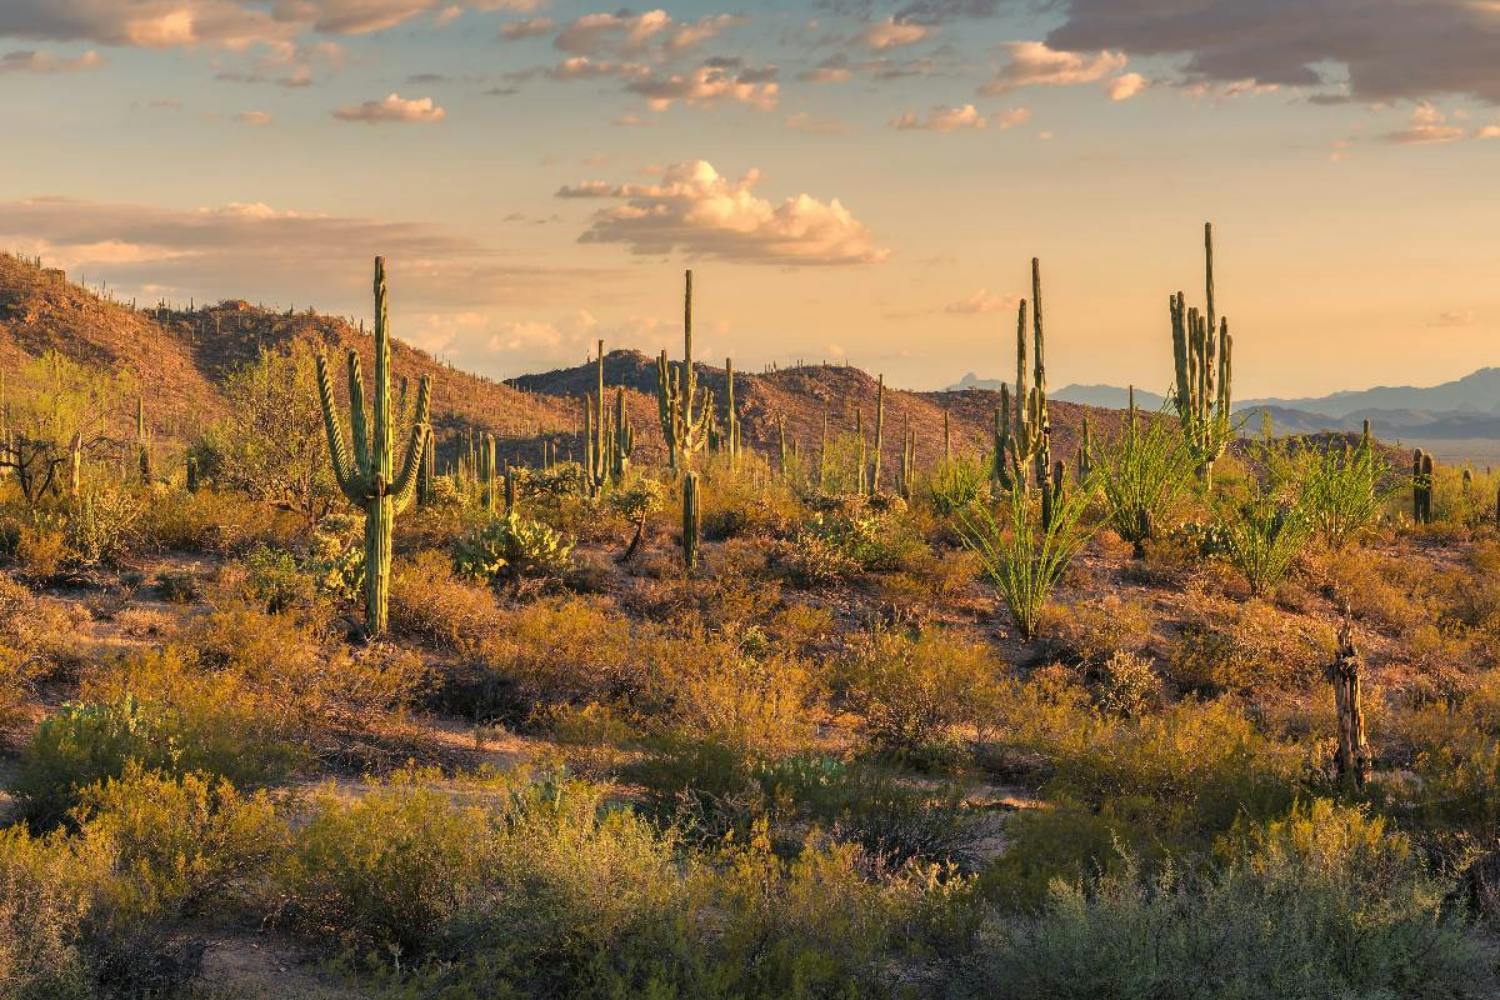 Saguaro National Park and Mt. Lemmon Self-Guided Audio Tour